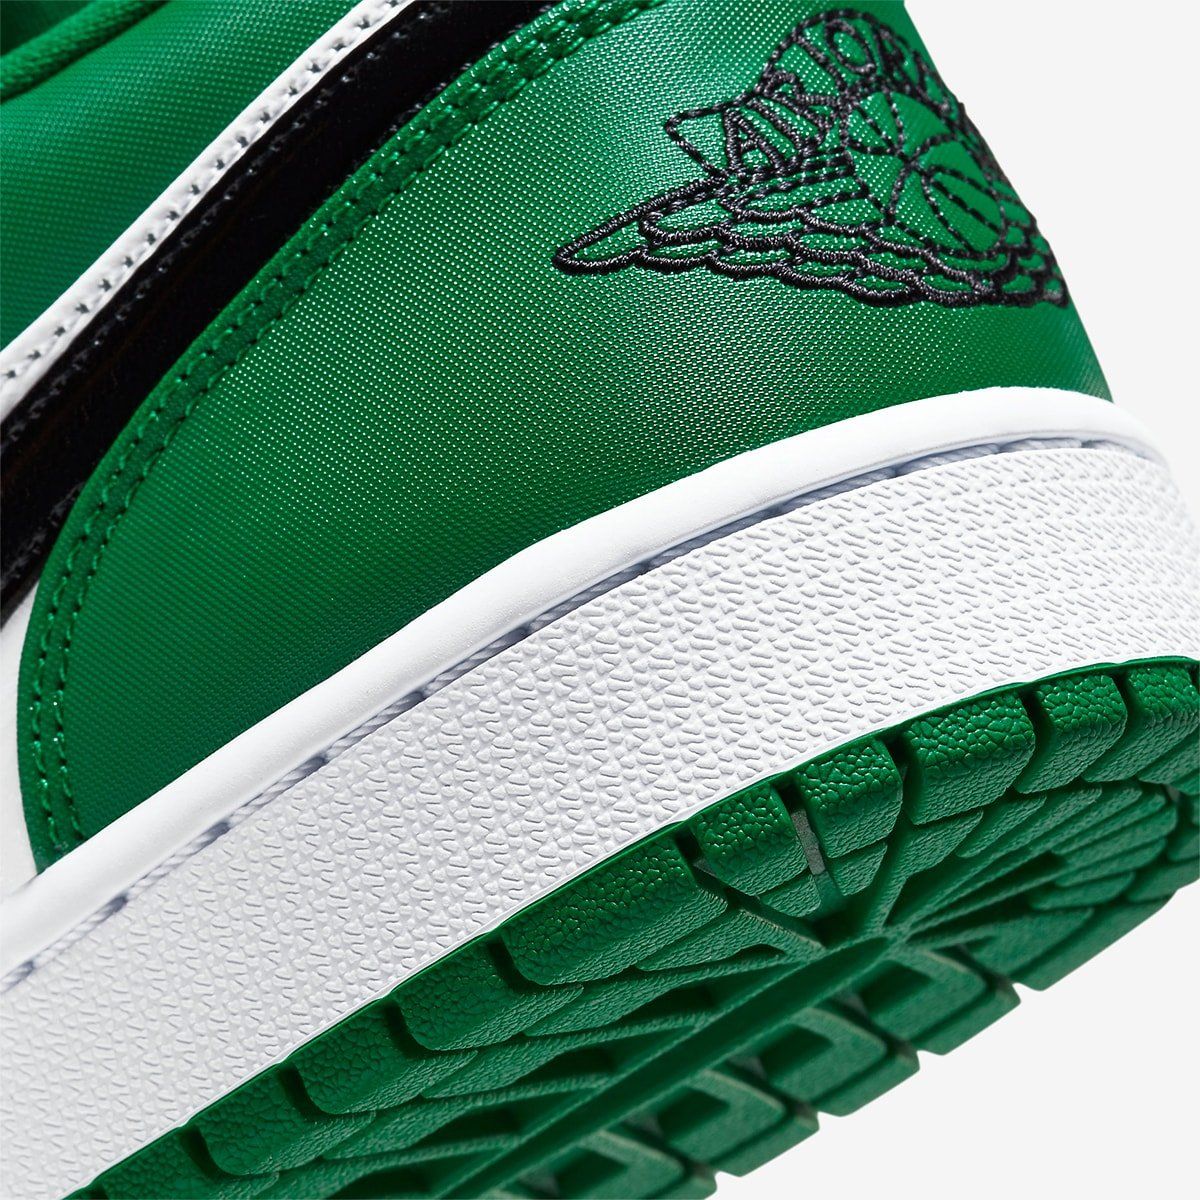 Available Now // Air Jordan 1 Low “Pine Green” | HOUSE OF HEAT